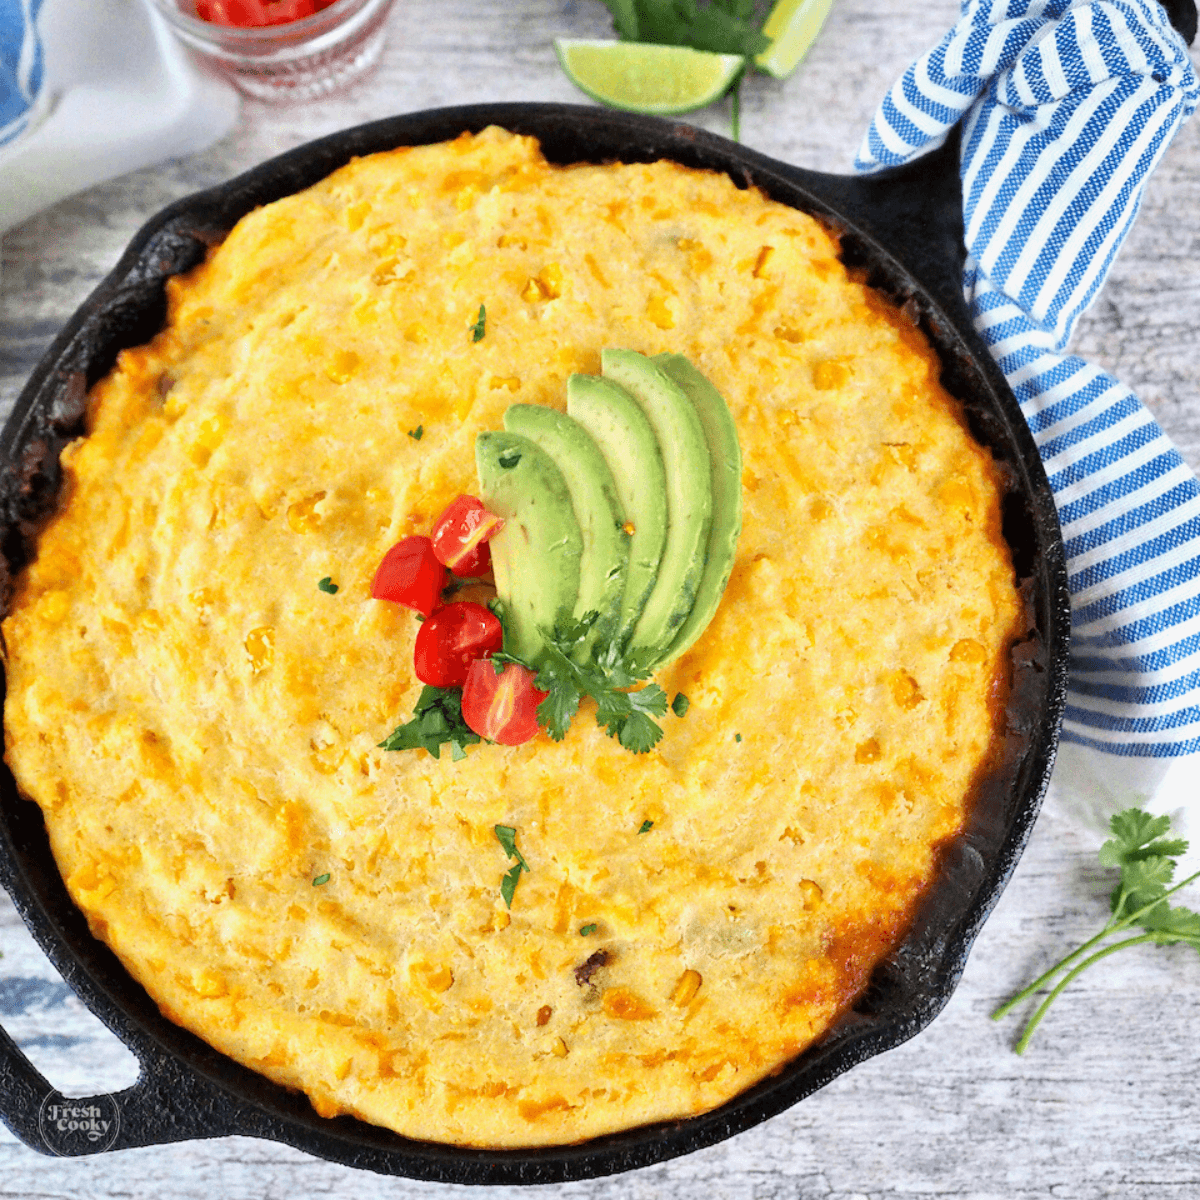 Easy tamale pie recipe, made in one skillet.